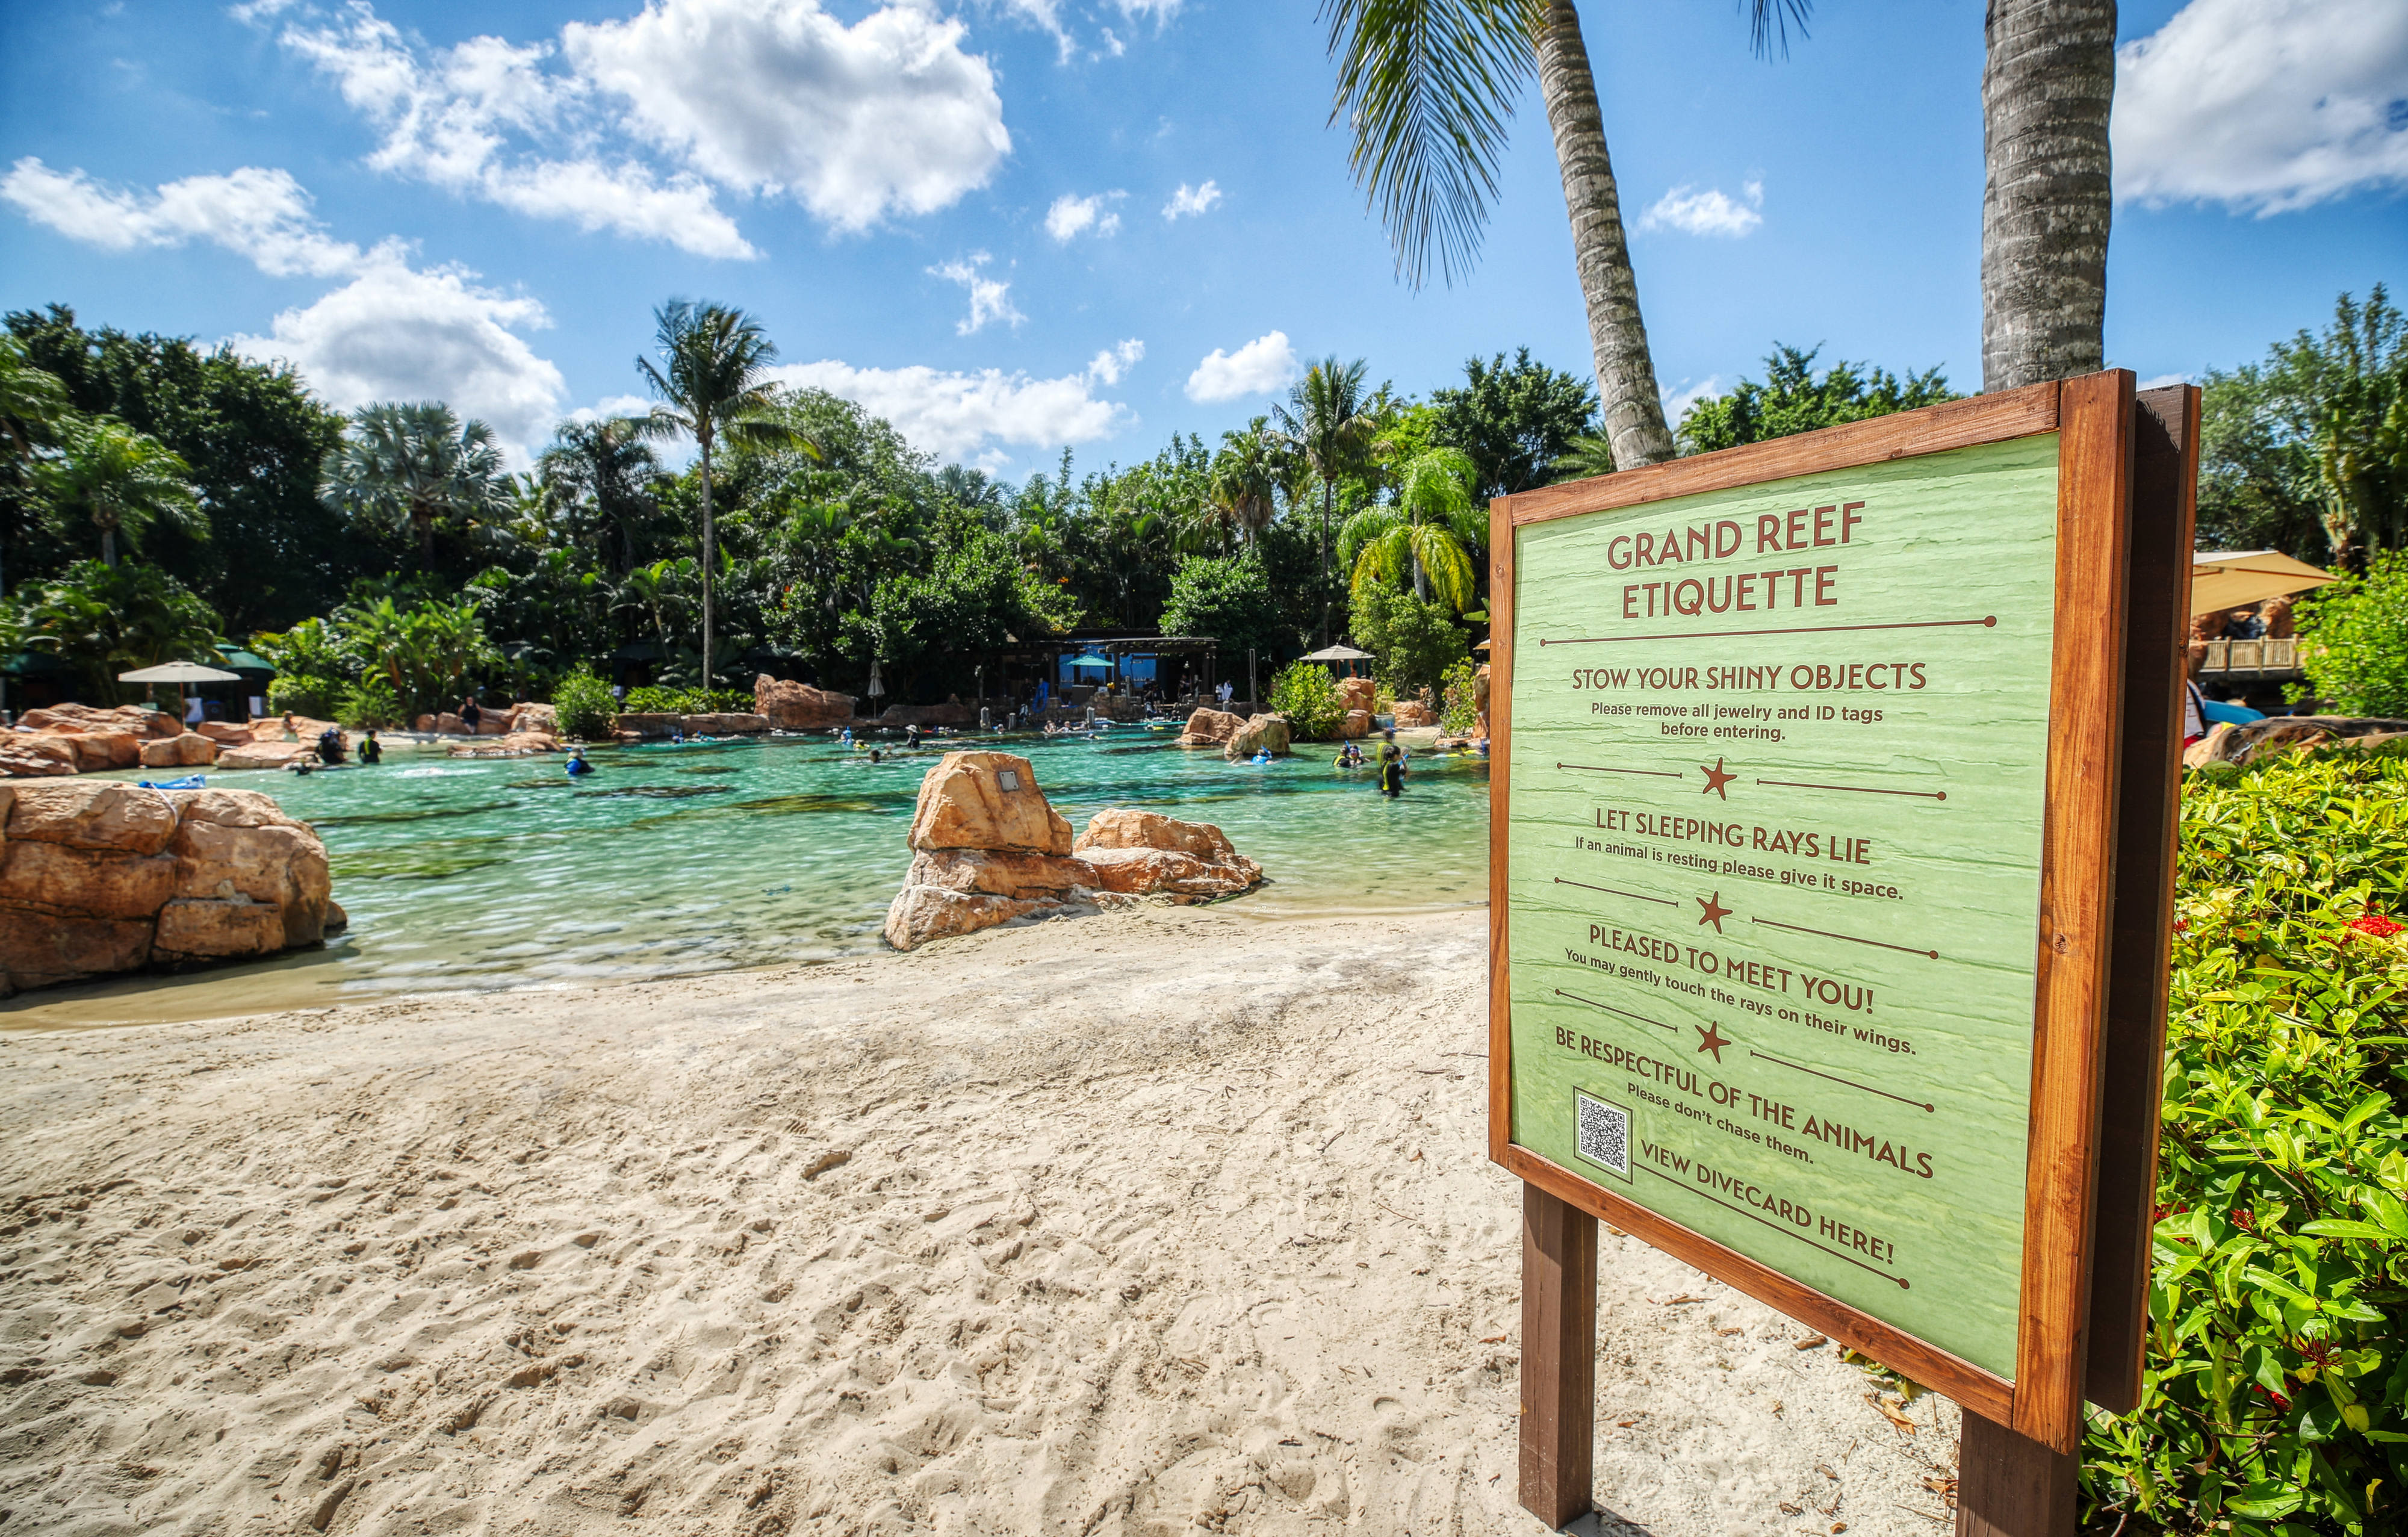 Girl, 13, dies after being found ‘unresponsive’ in Discovery Cove pool